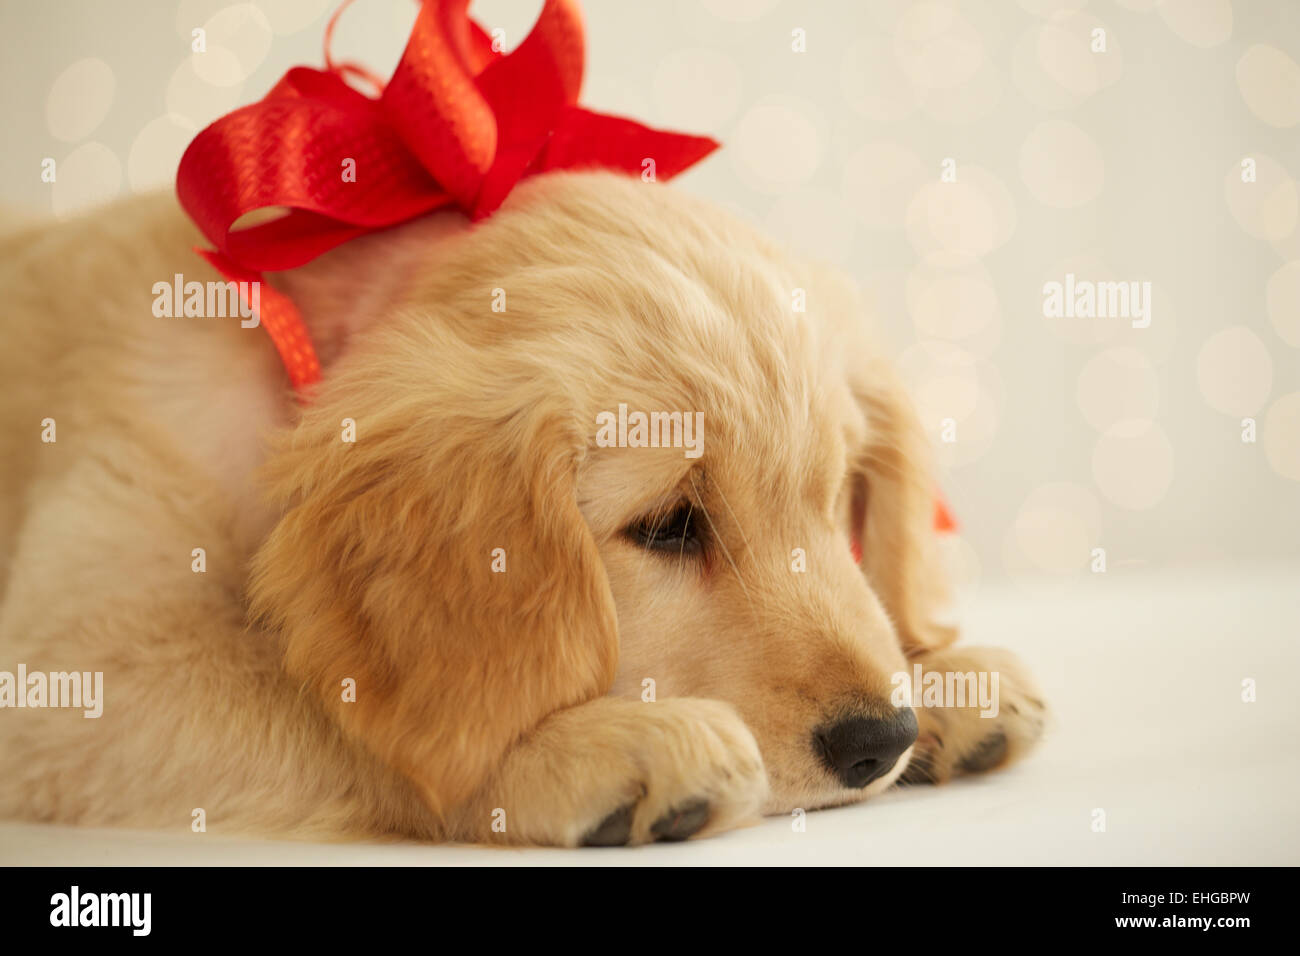 Golden Retriever Puppy with Red Bow Stock Photo - Alamy